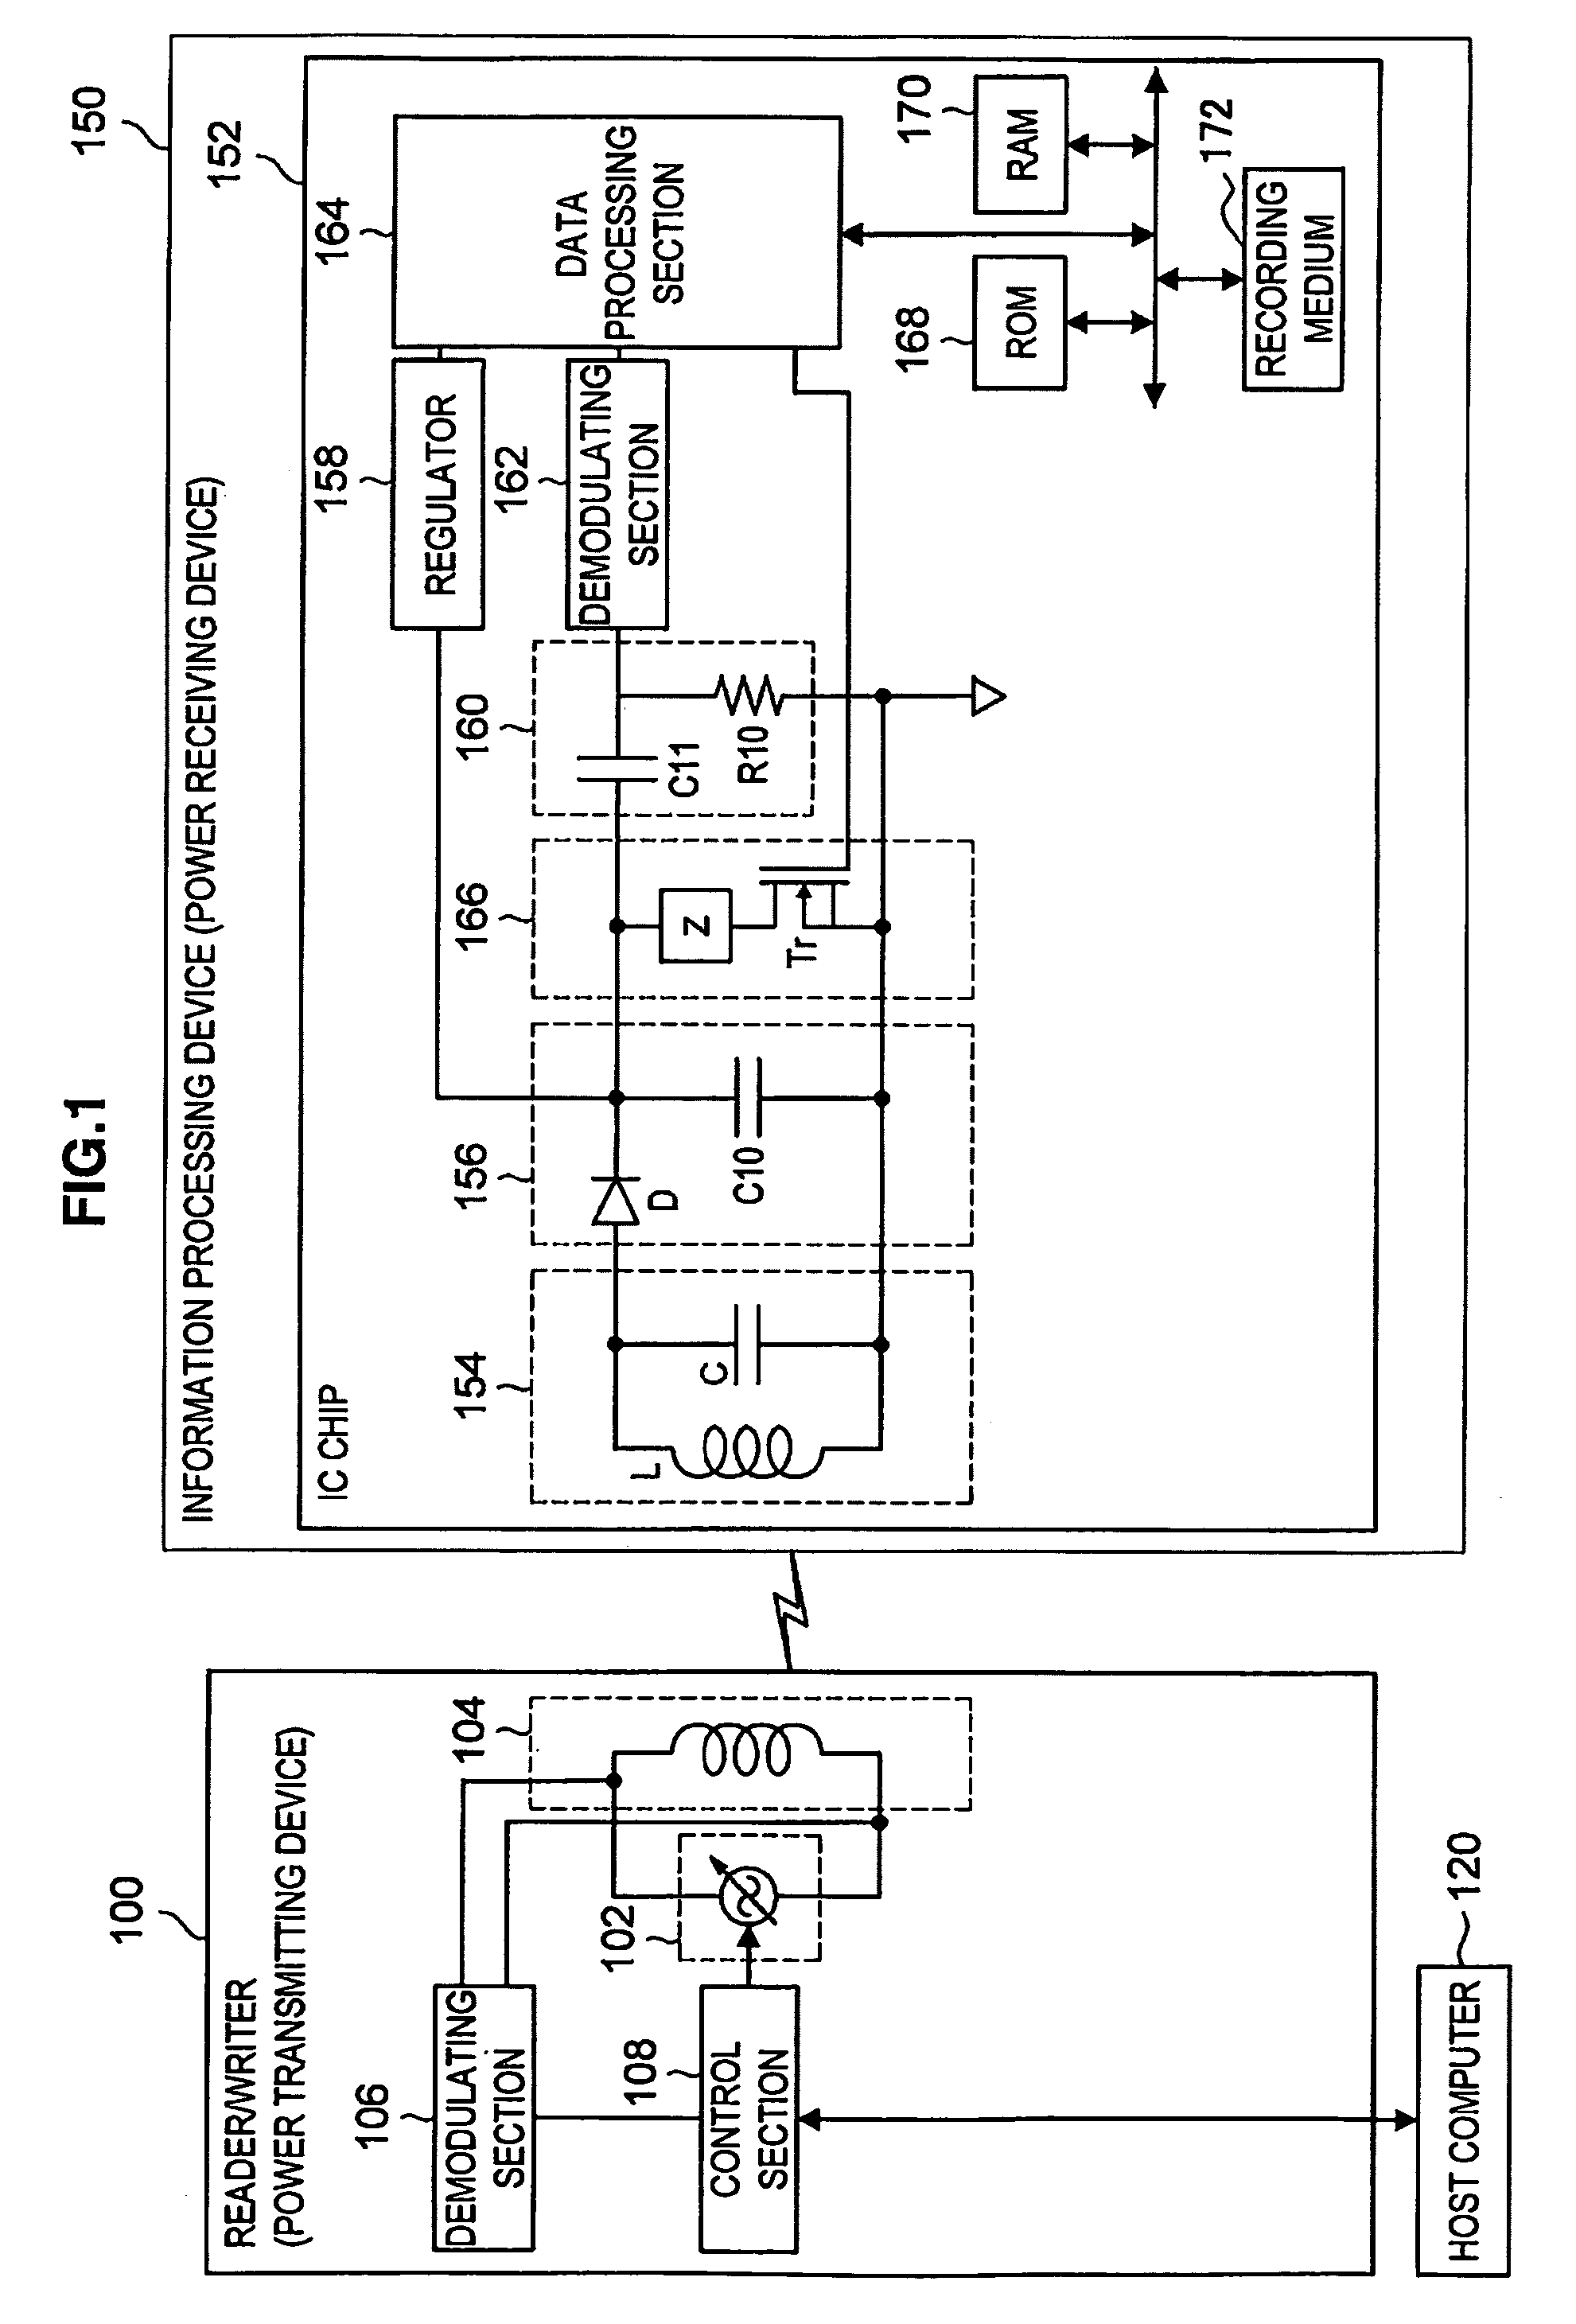 Power receiving device and power transfer system